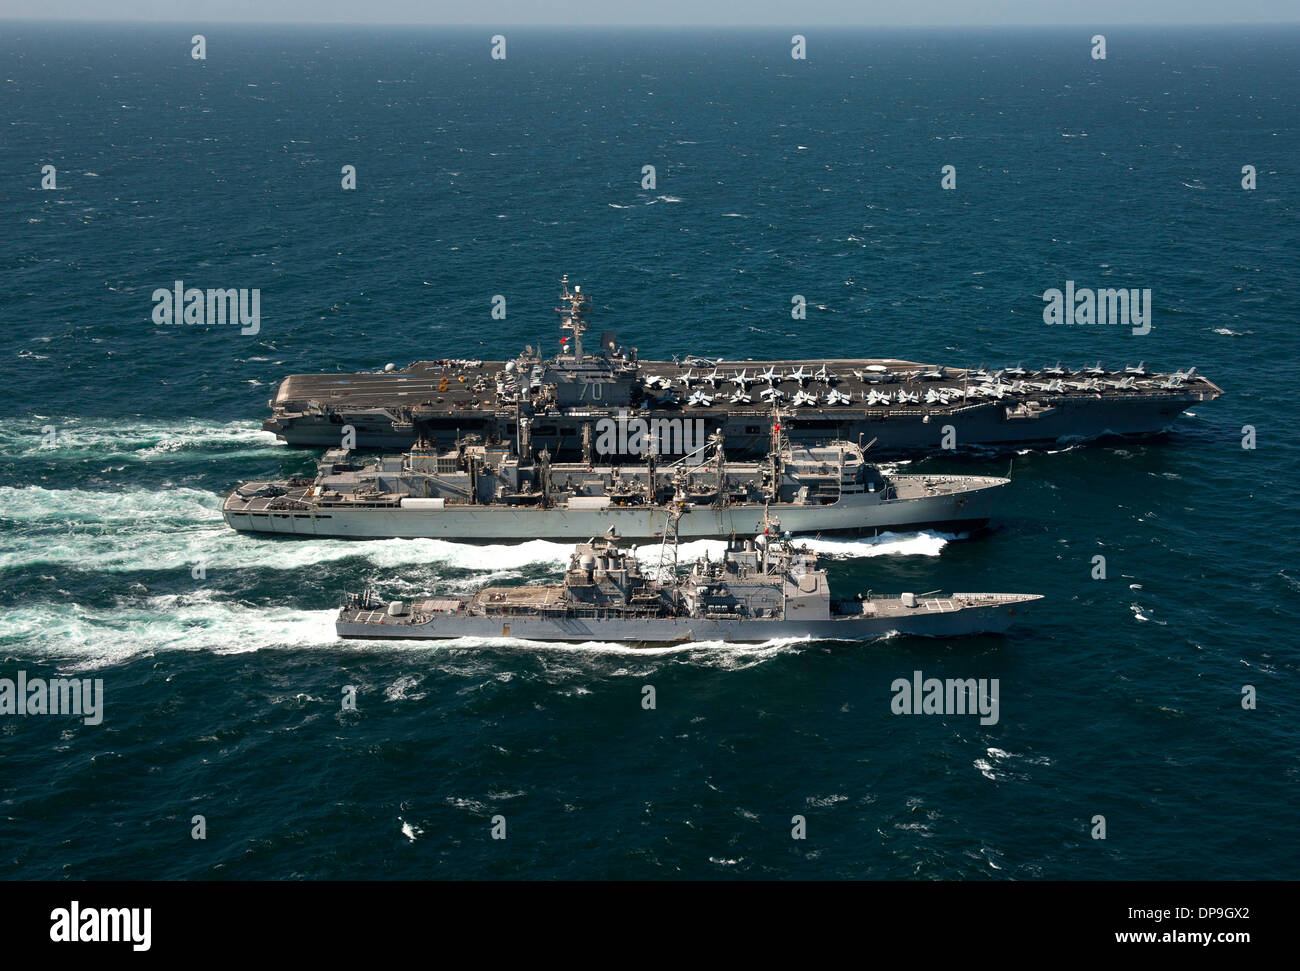 Aircraft carrier USS Carl Vinson, guided missile cruiser USS Bunker Hill and support ship USNS Bridge Stock Photo